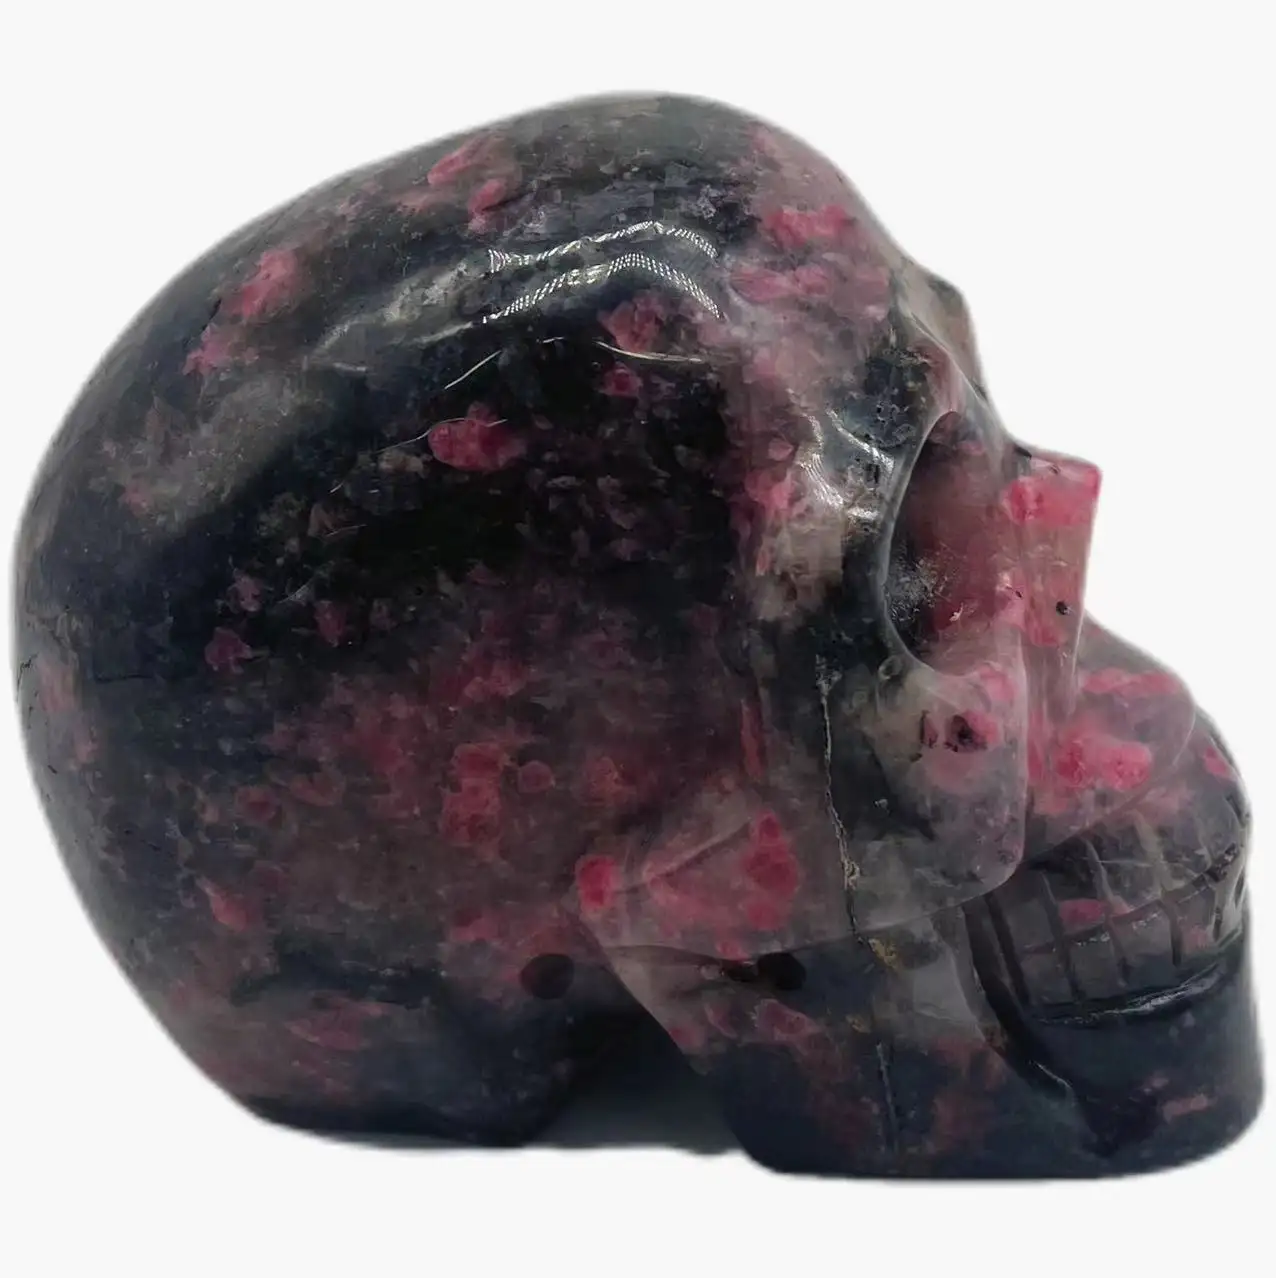 Natural Mineral Semi Precious Stone Hand Carved Realistic rhodoniter Crystal Skulls For Decoration.